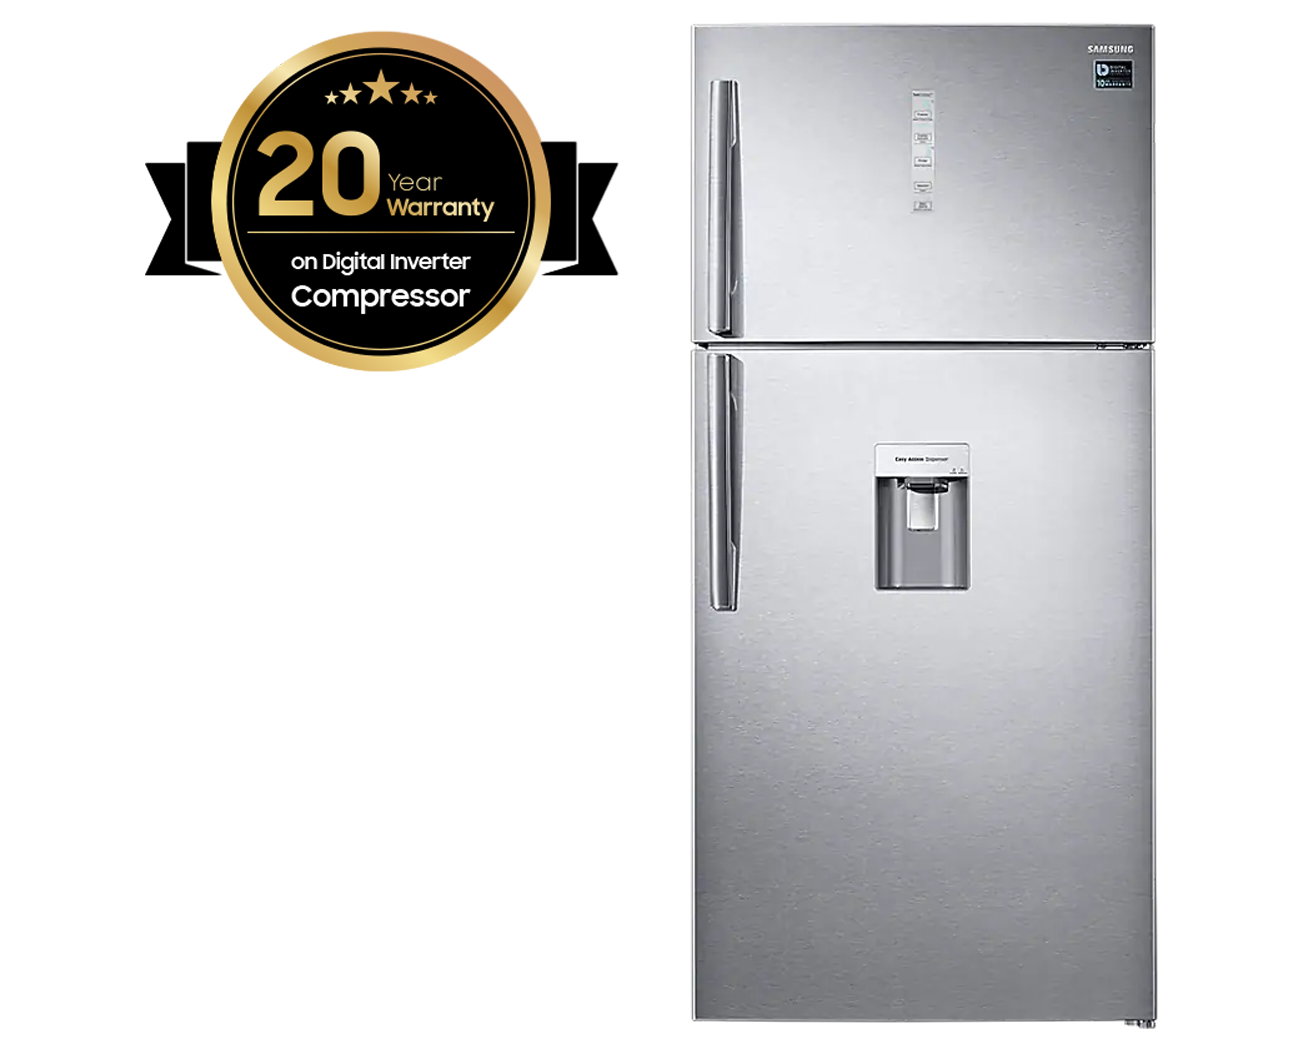 How to use the Child lock on Samsung Refrigerator?